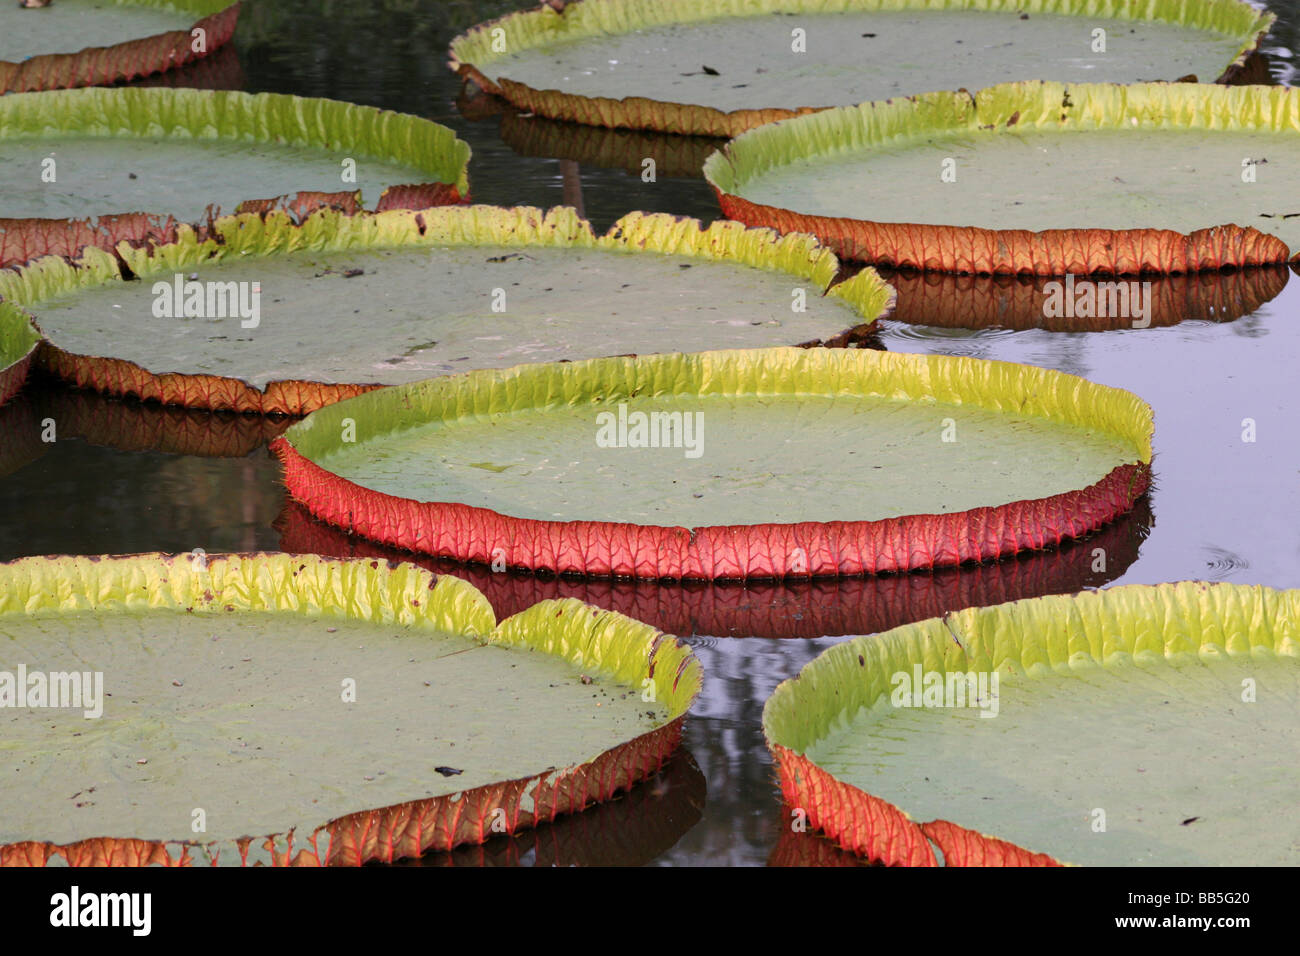 Giant Amazon Water Lily Pads Floating In Pond At the Indian Botanical Gardens, Shibpur, Howrah, Near Kolkata, India Stock Photo